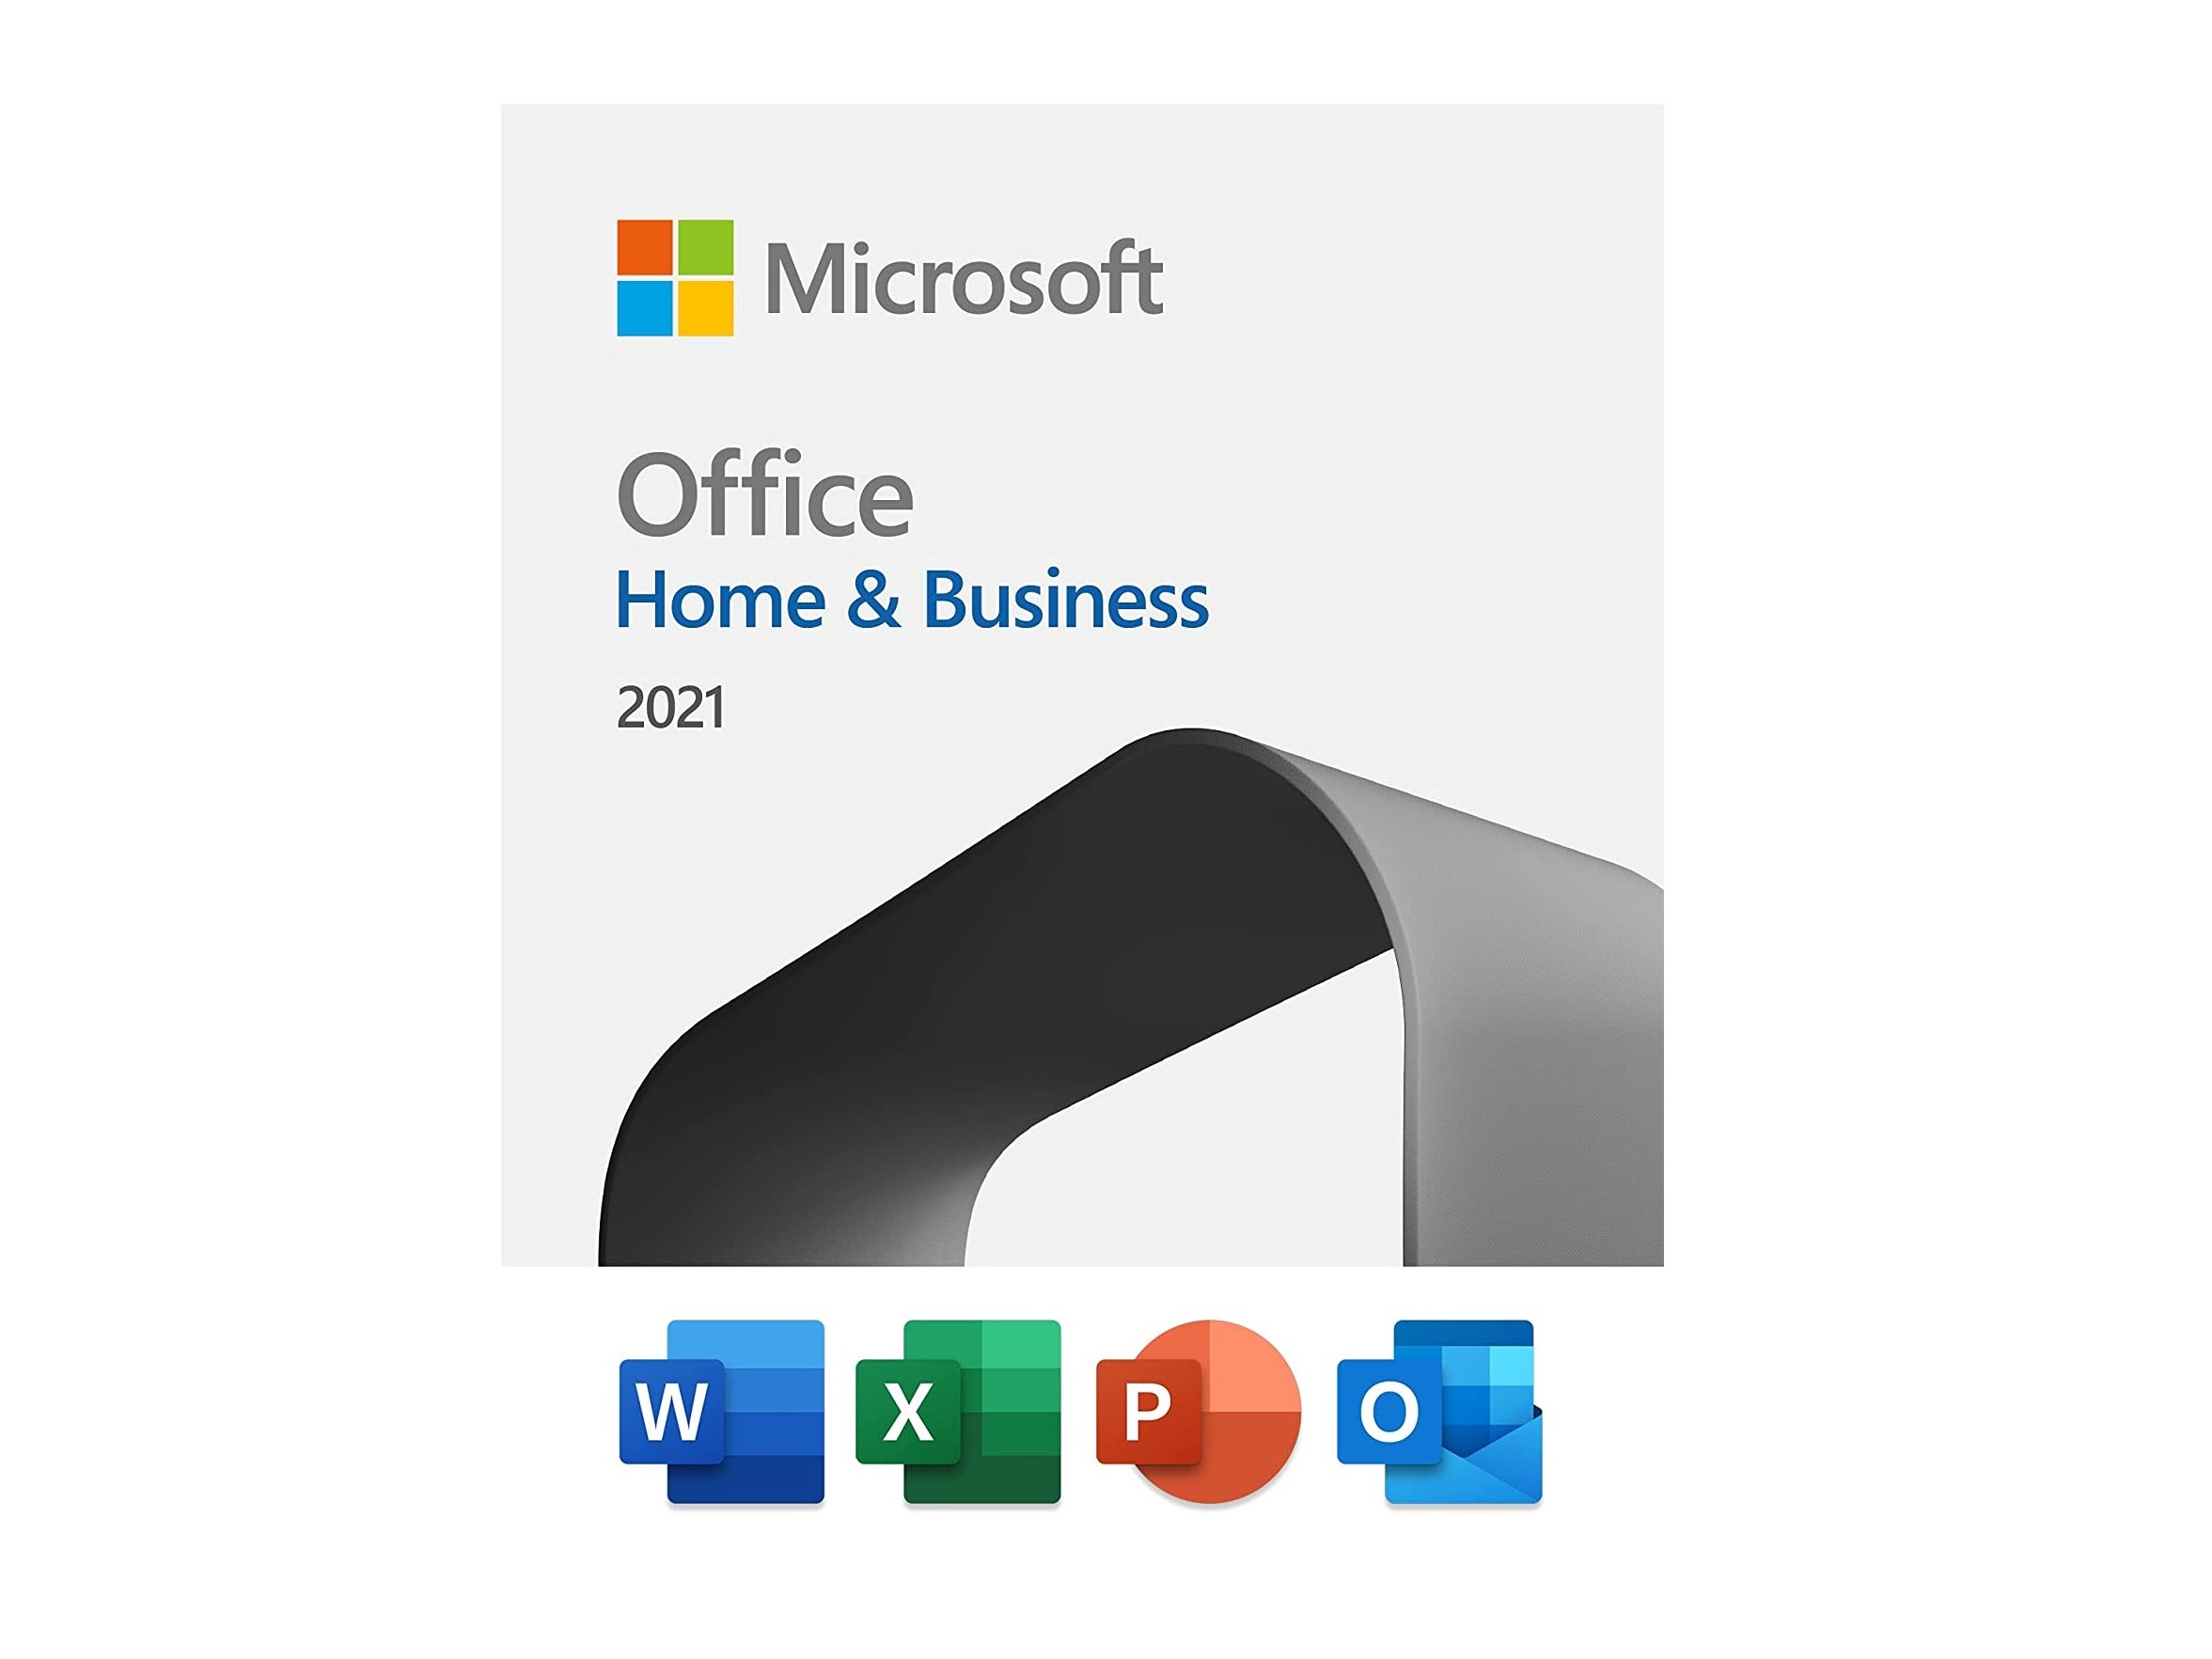 Microsoft Office Home & Business 2021 local license cover image.